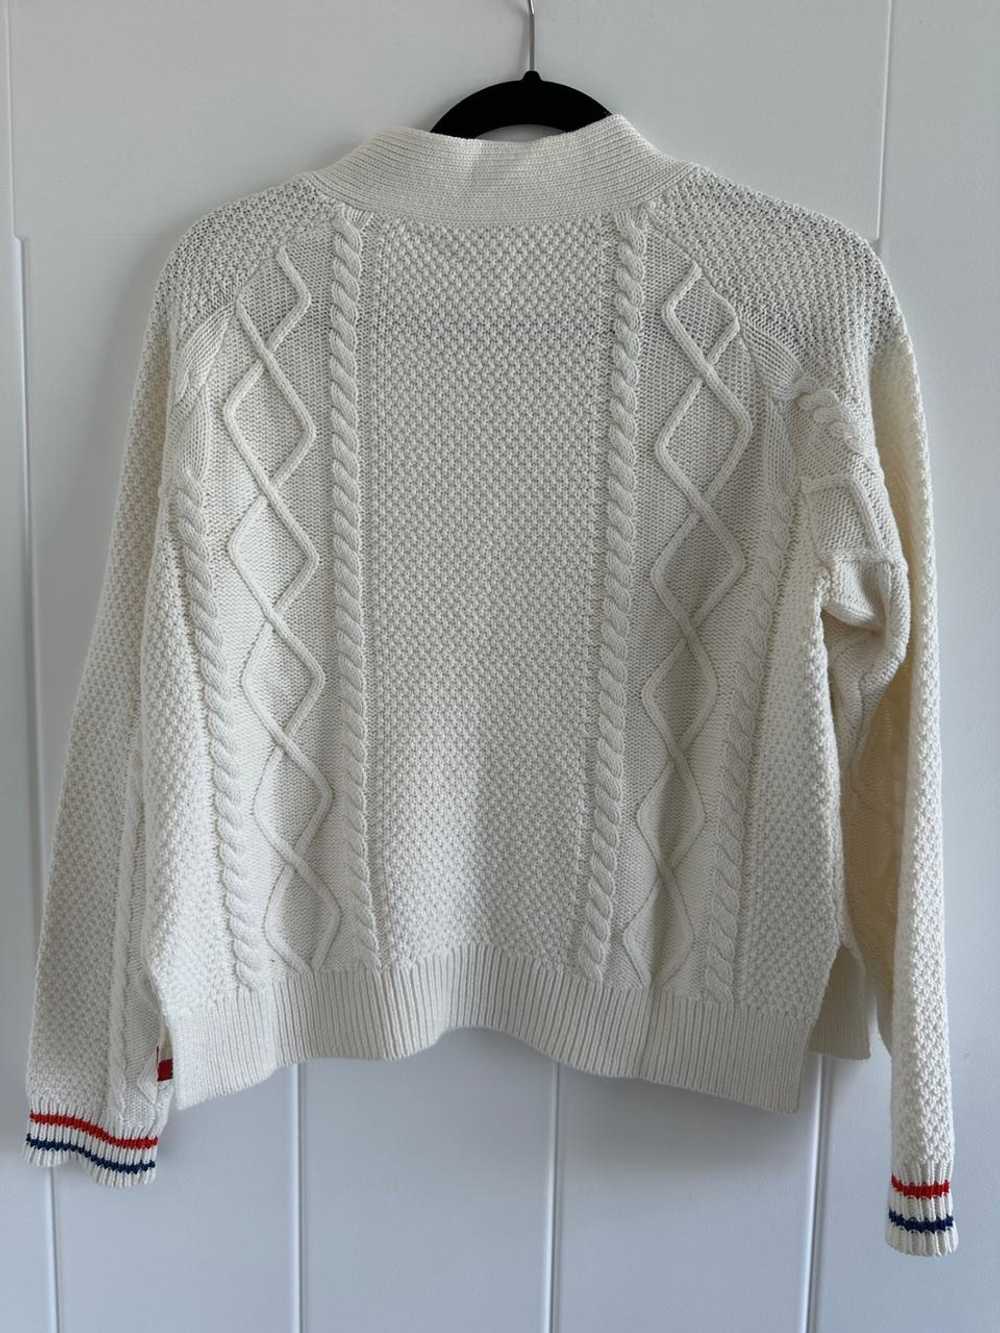 KULE Cable knit sweater (XS) | Used, Secondhand,… - image 2